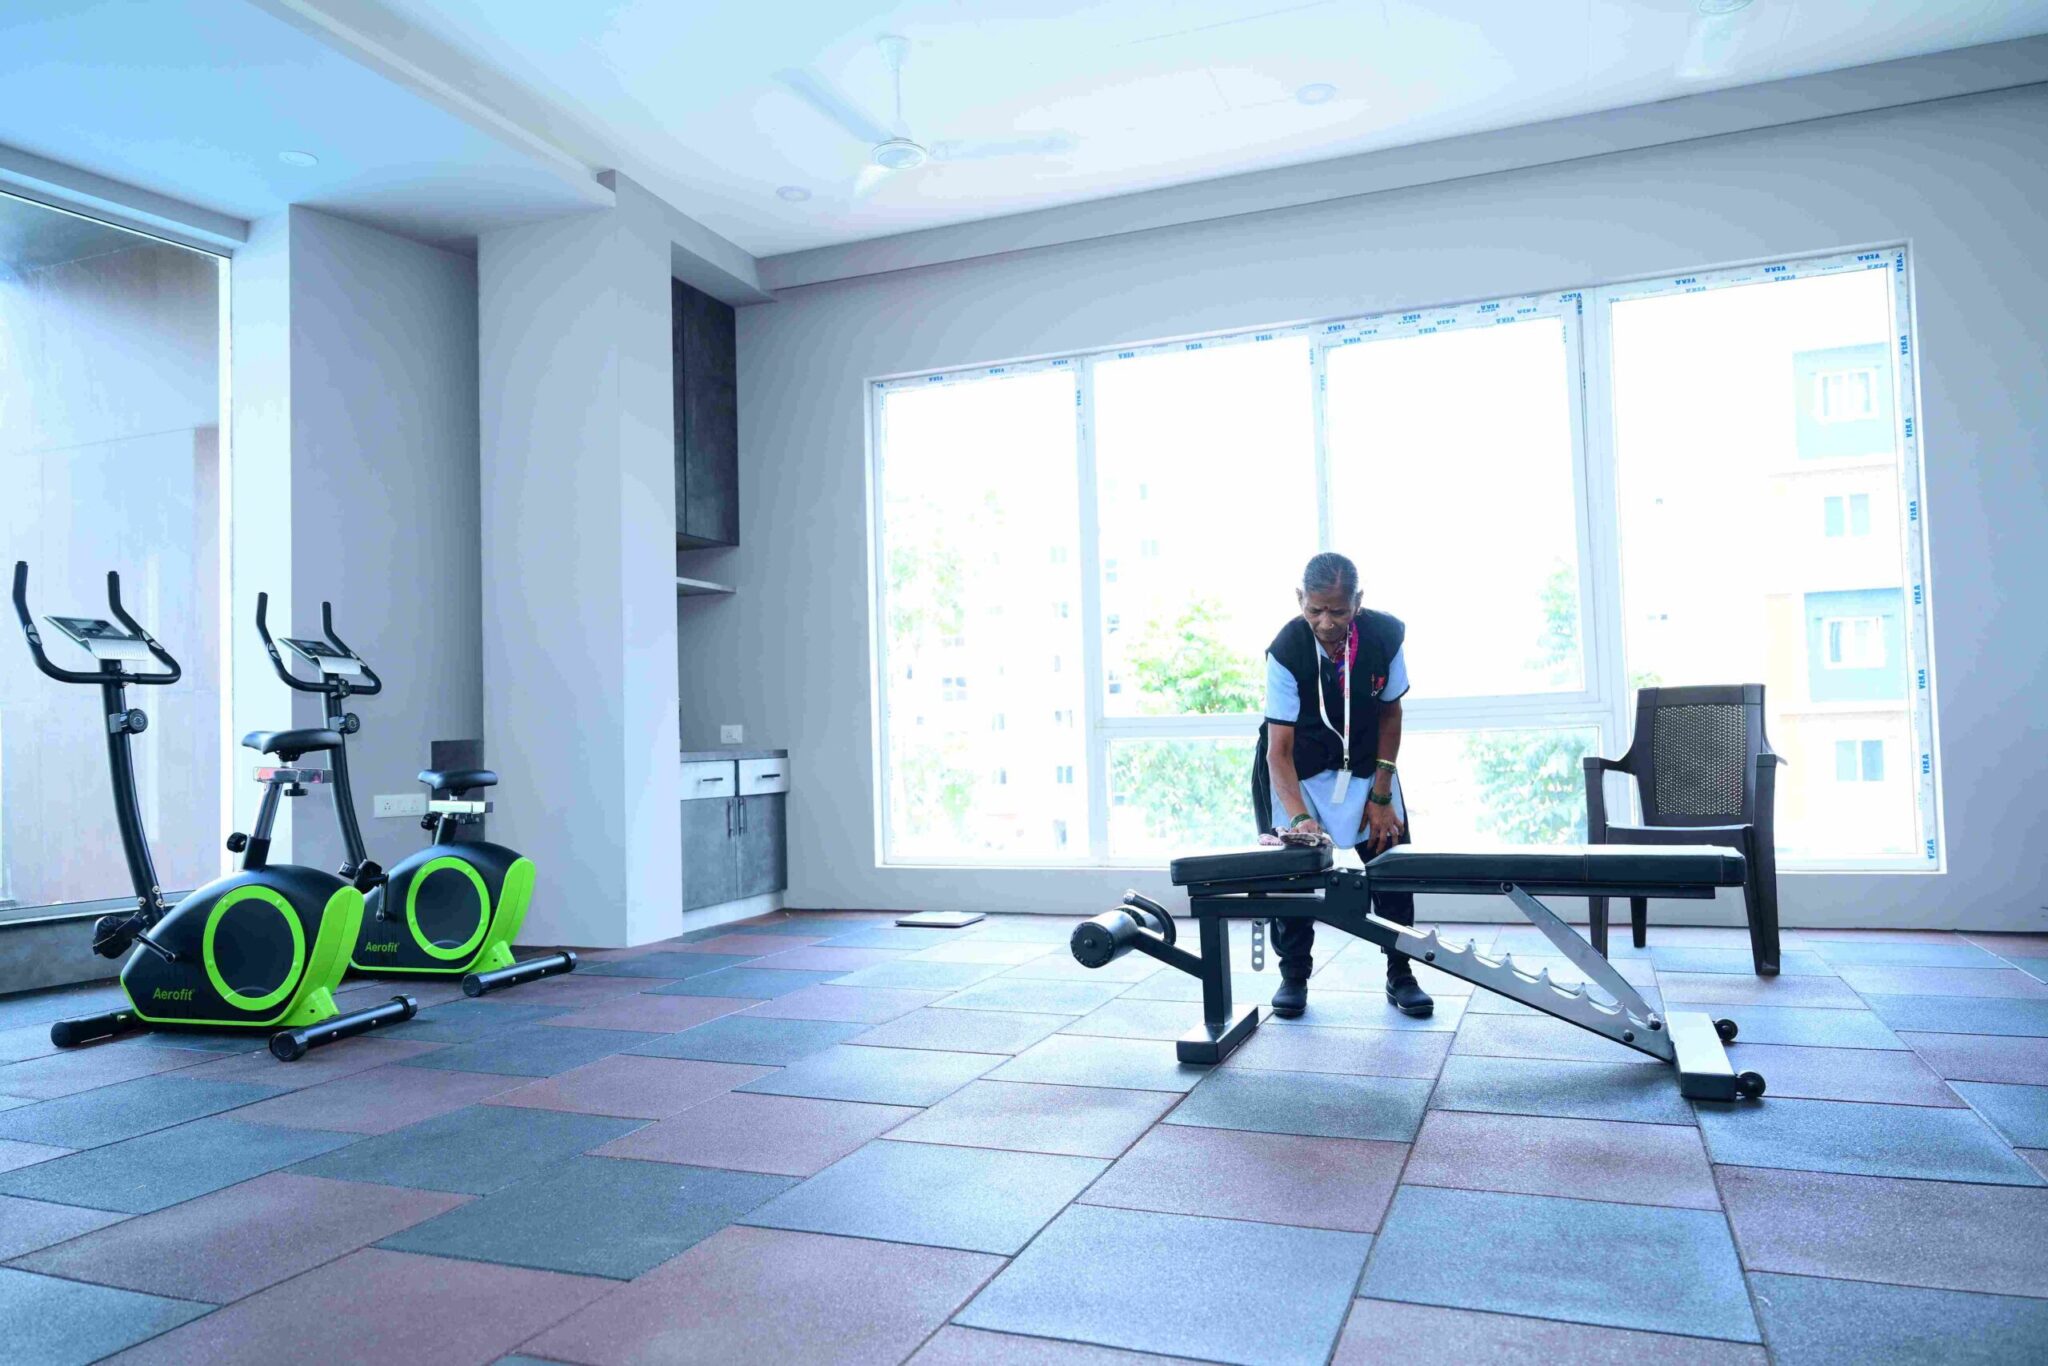 Gym Cleaning Services near me